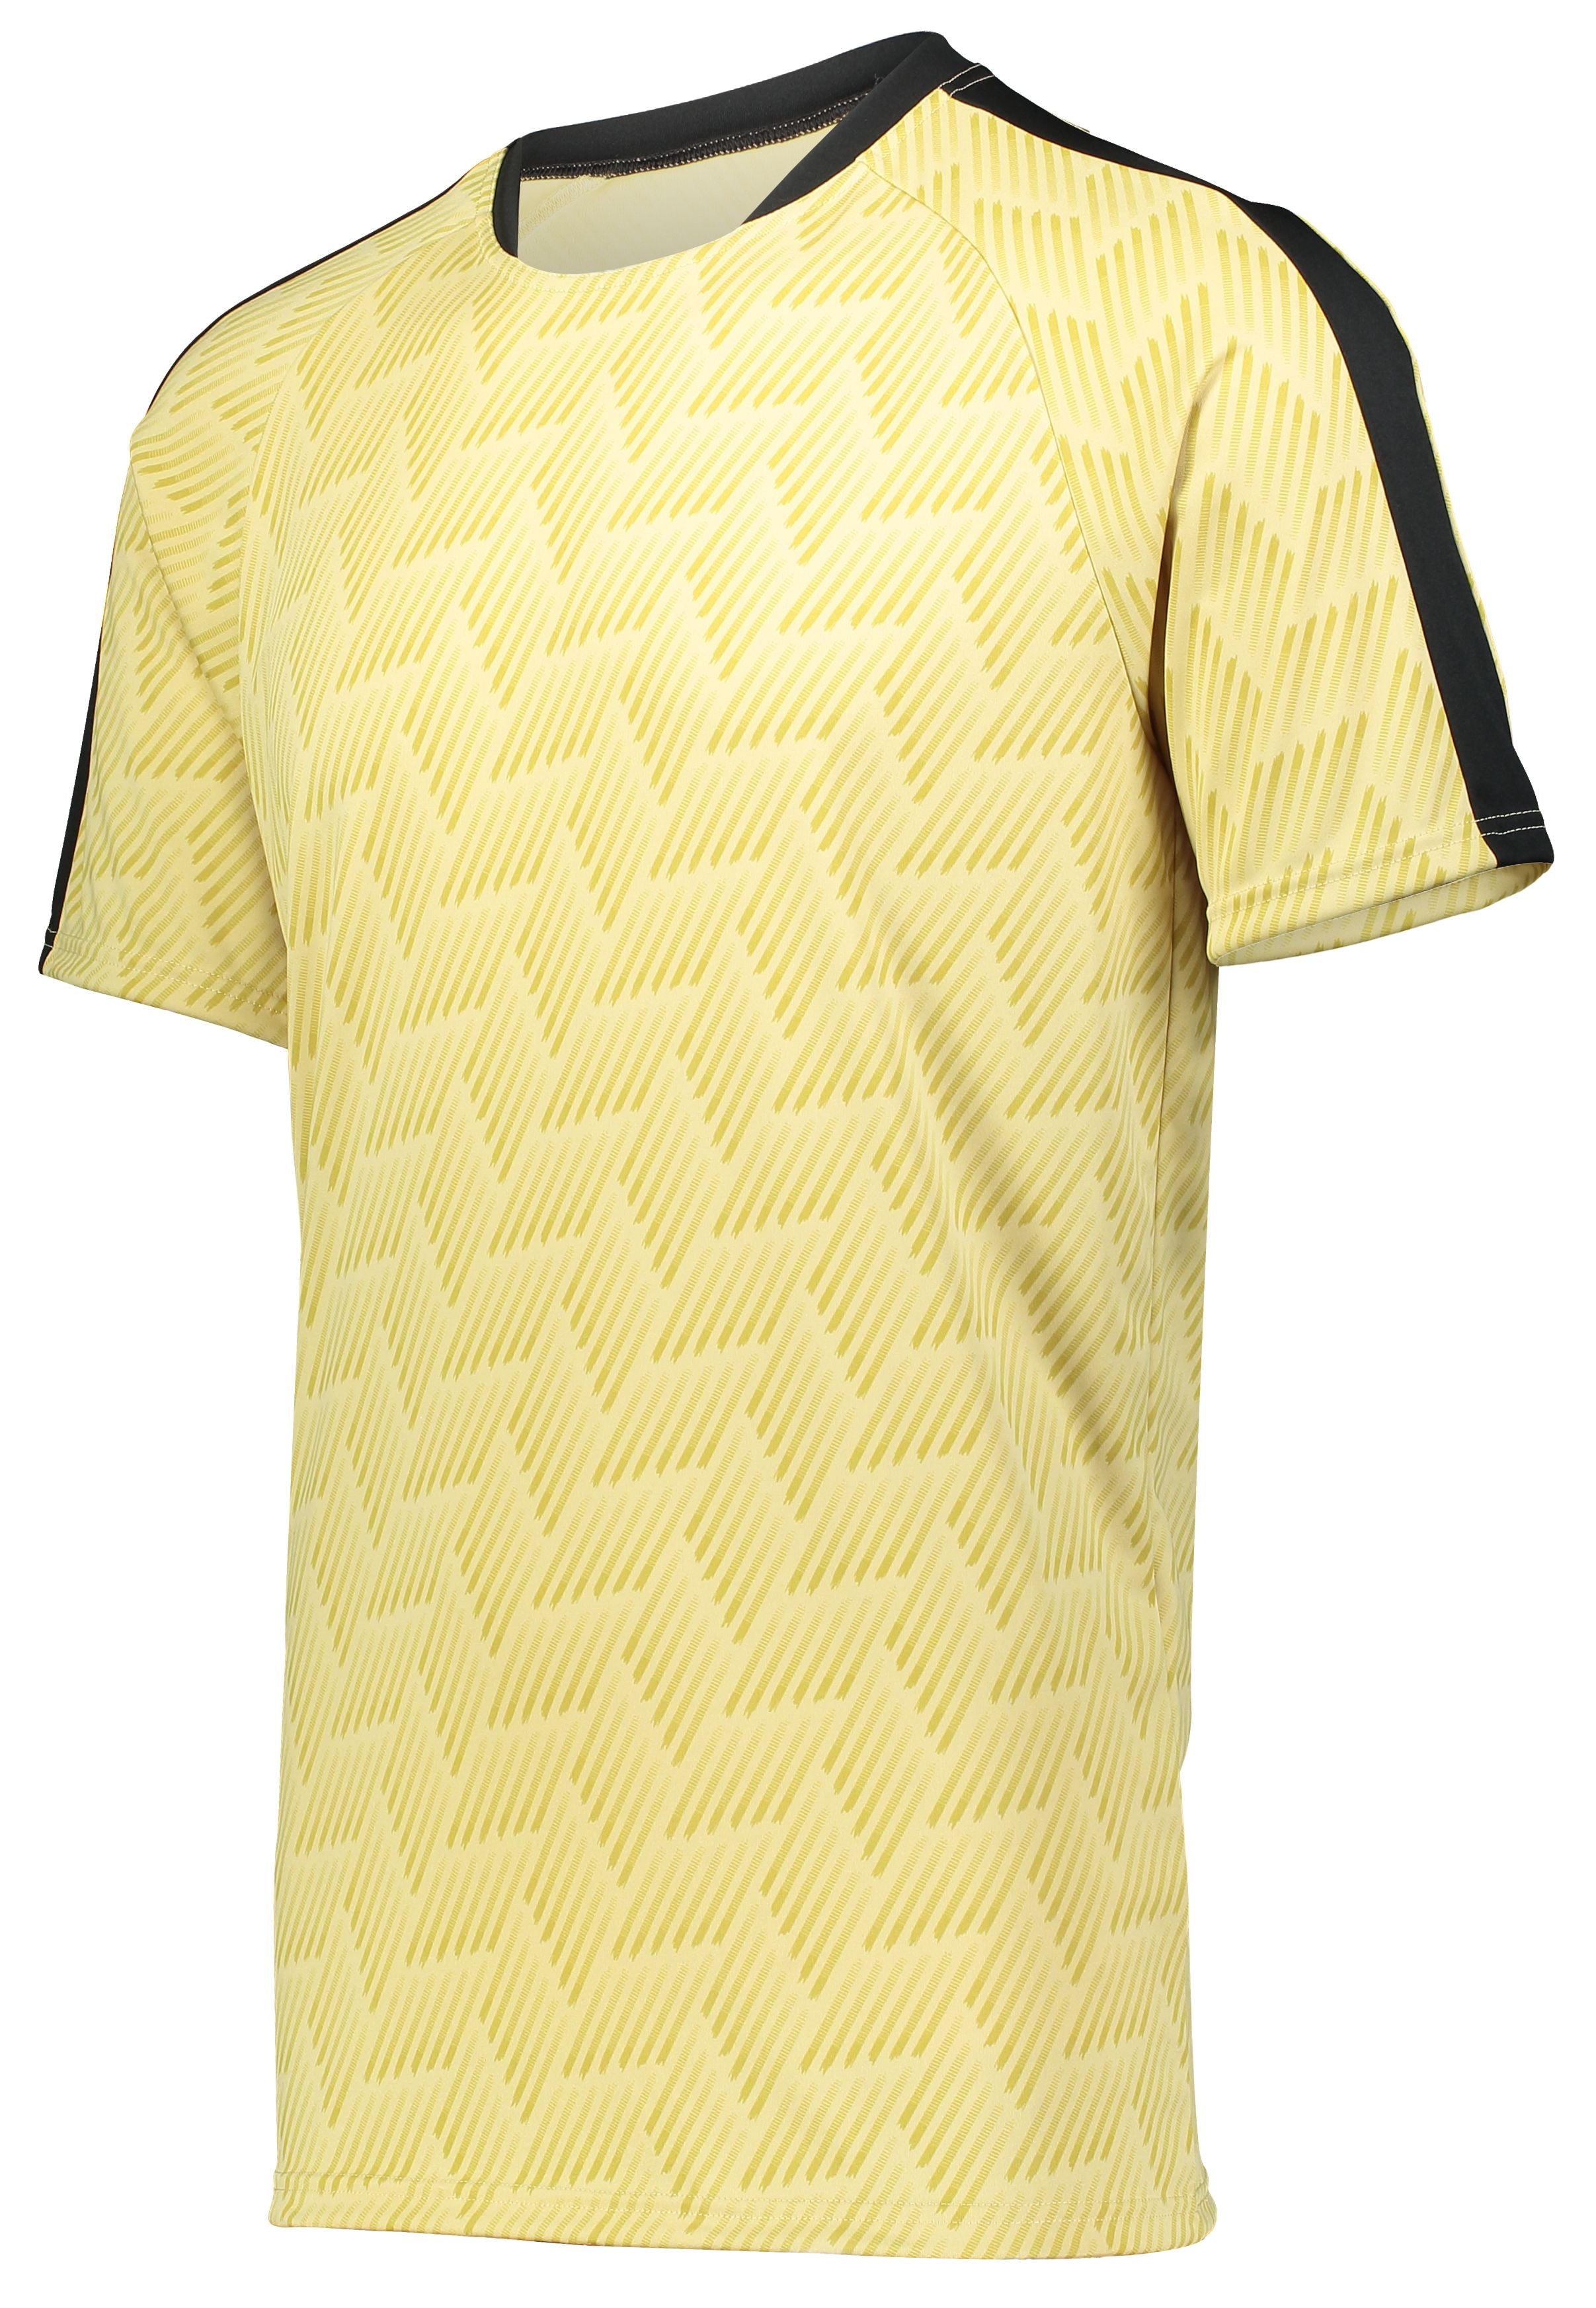 High 5 Hypervolt Jersey in Vegas Gold Print/Black  -Part of the Adult, Adult-Jersey, High5-Products, Soccer, Shirts, All-Sports-1 product lines at KanaleyCreations.com